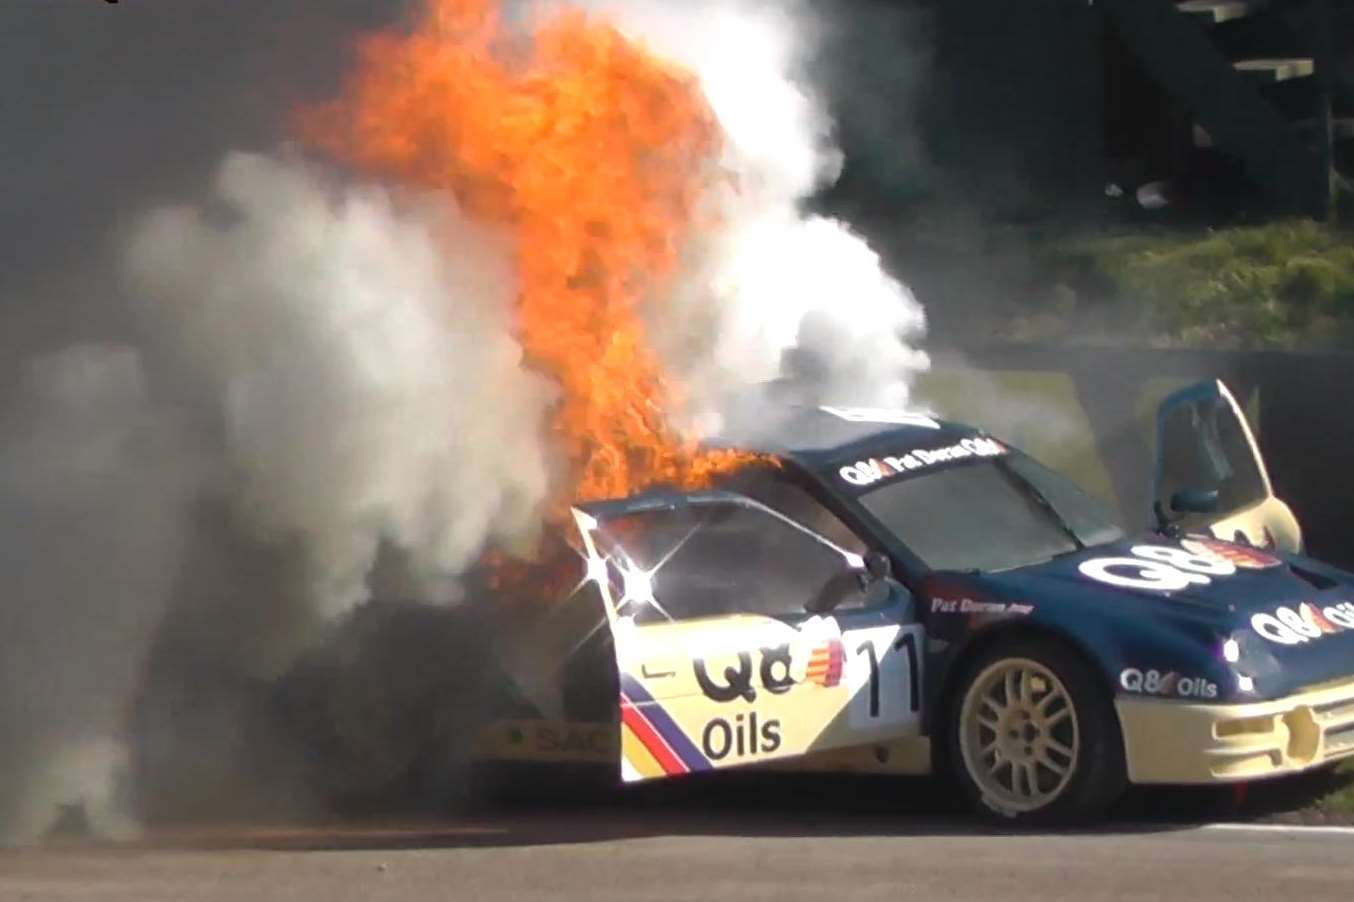 The doors of Pat Doran's blazing car fly open. Picture: allthekasparas/YouTube